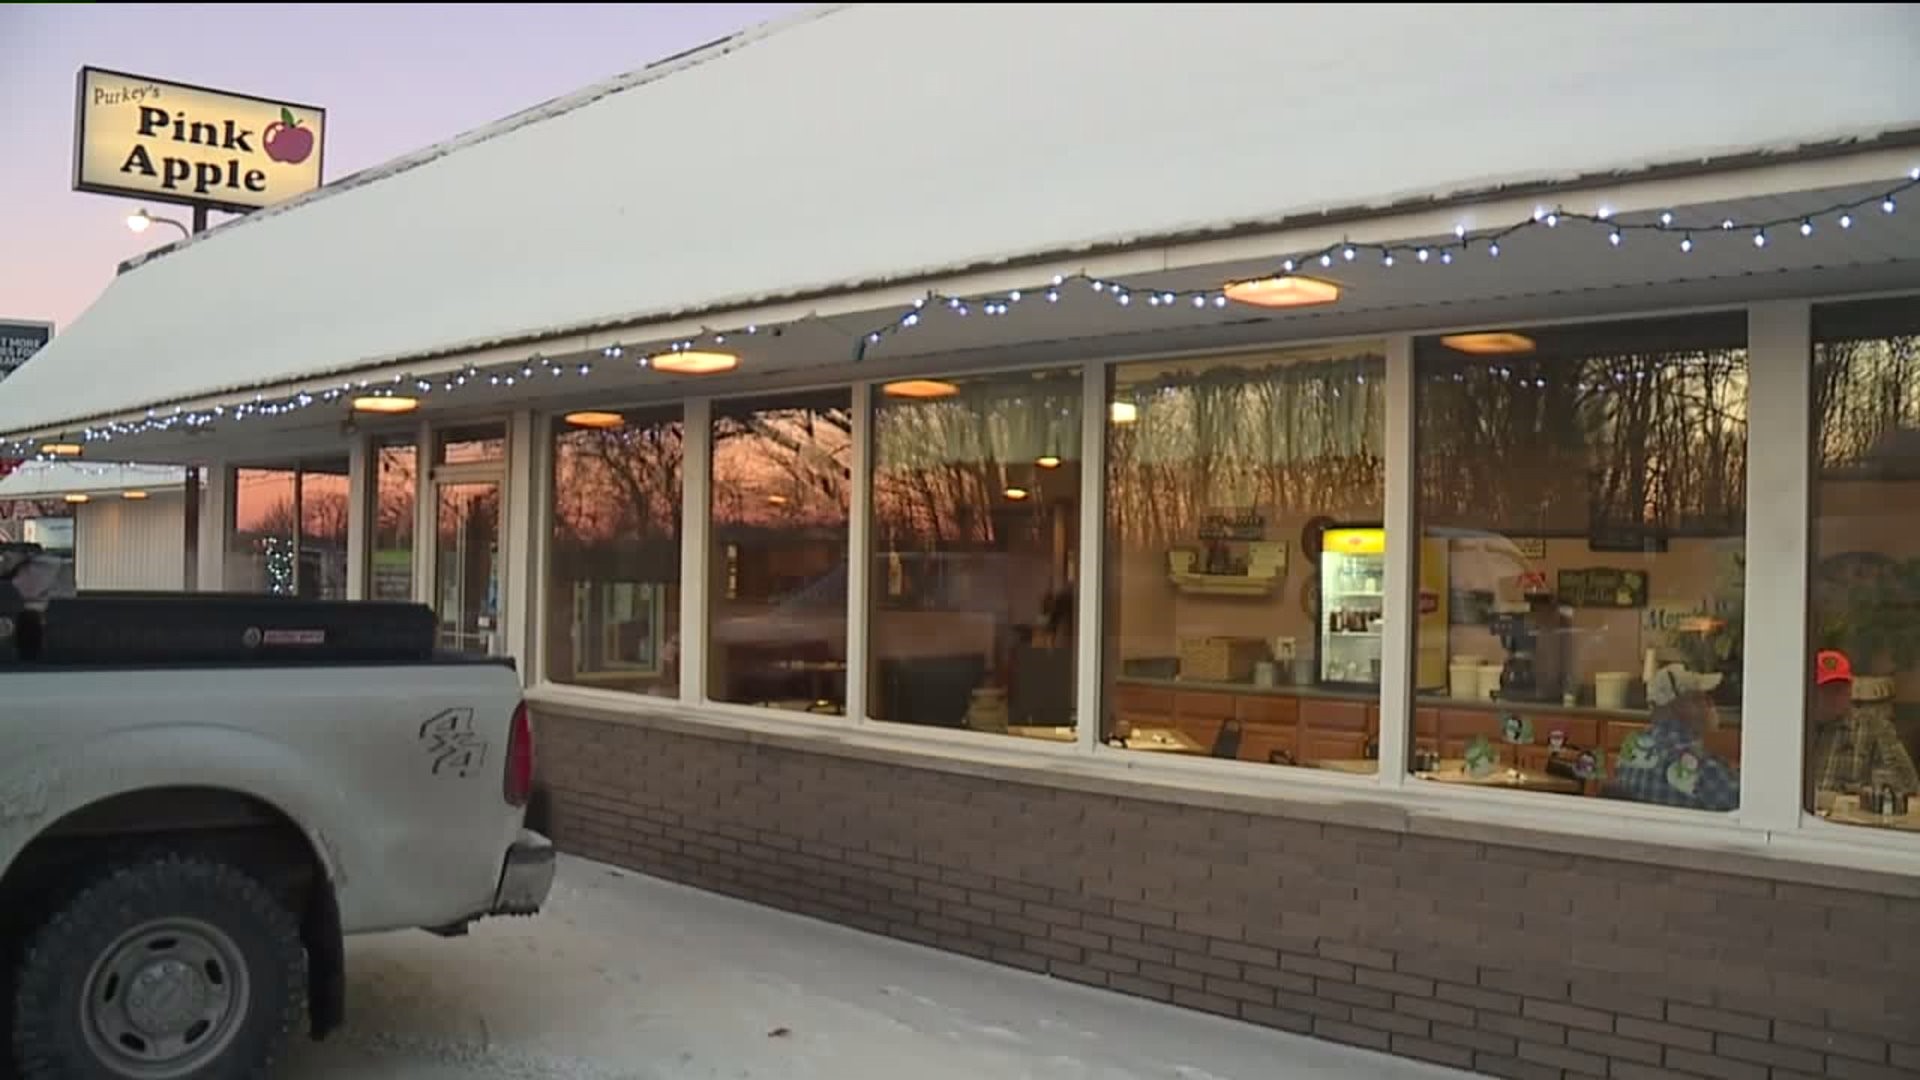 Cold Freezes Some Businesses